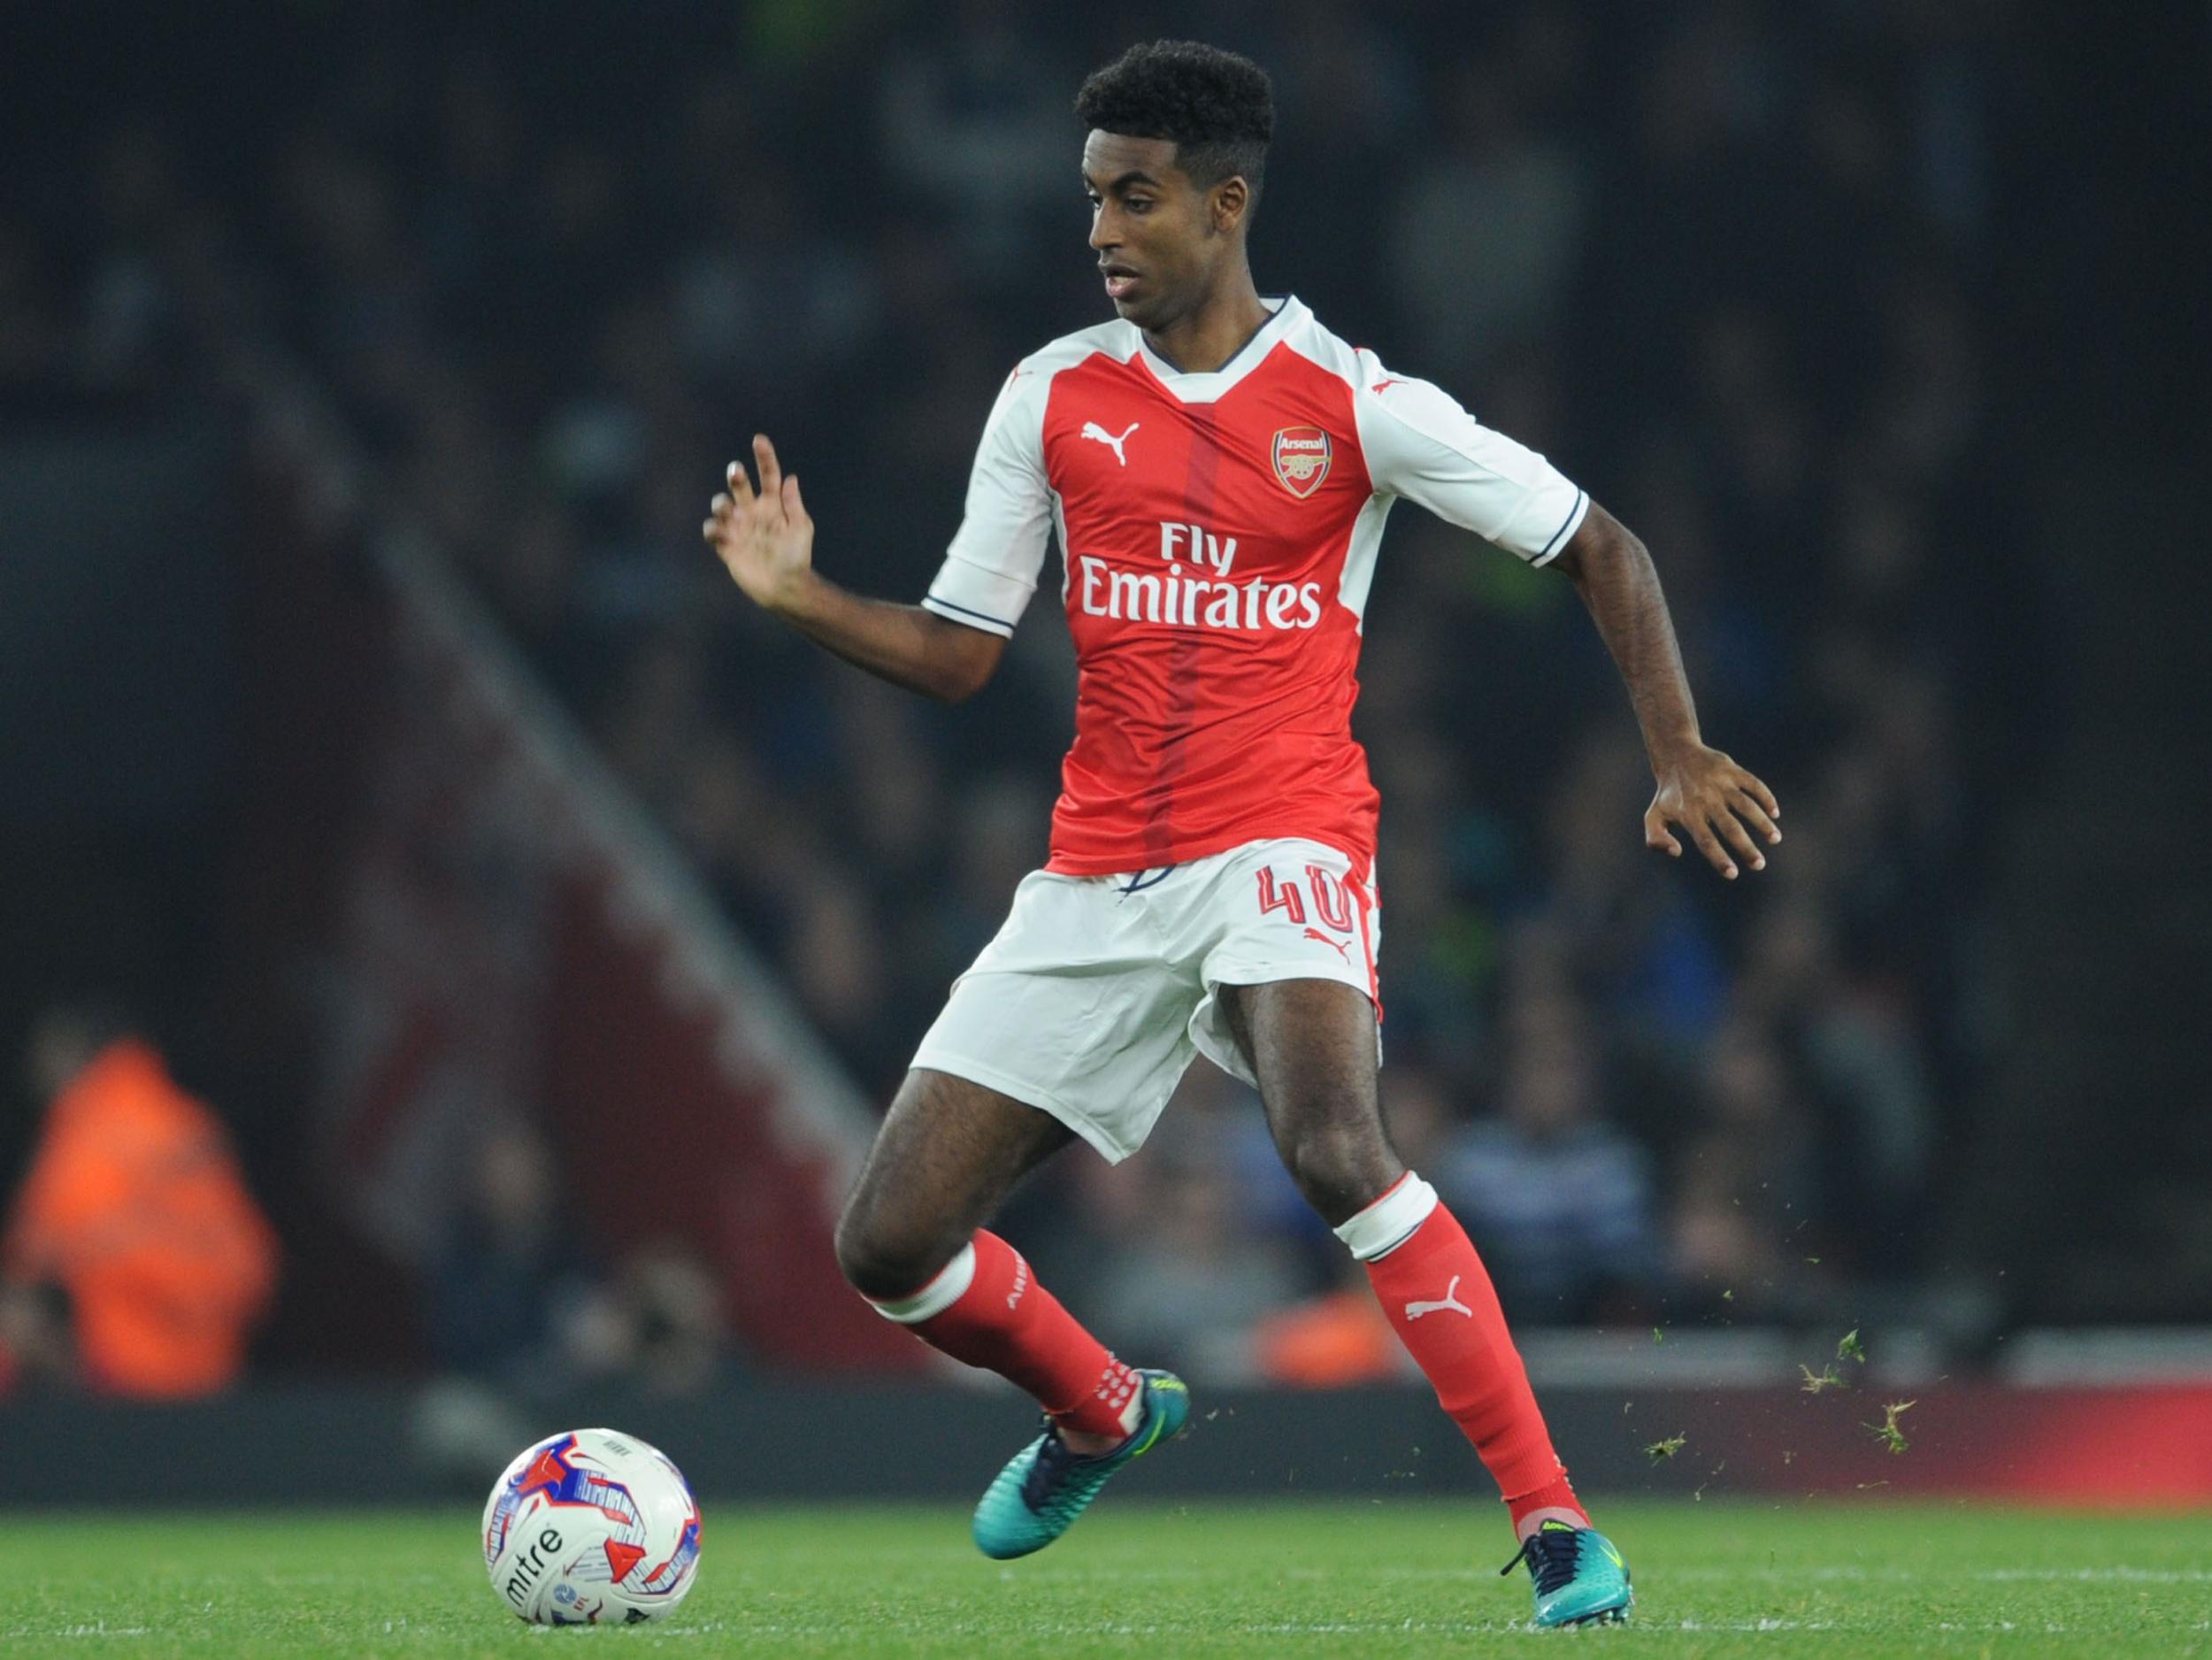 Zelalem has not grown physically as Wenger had hoped